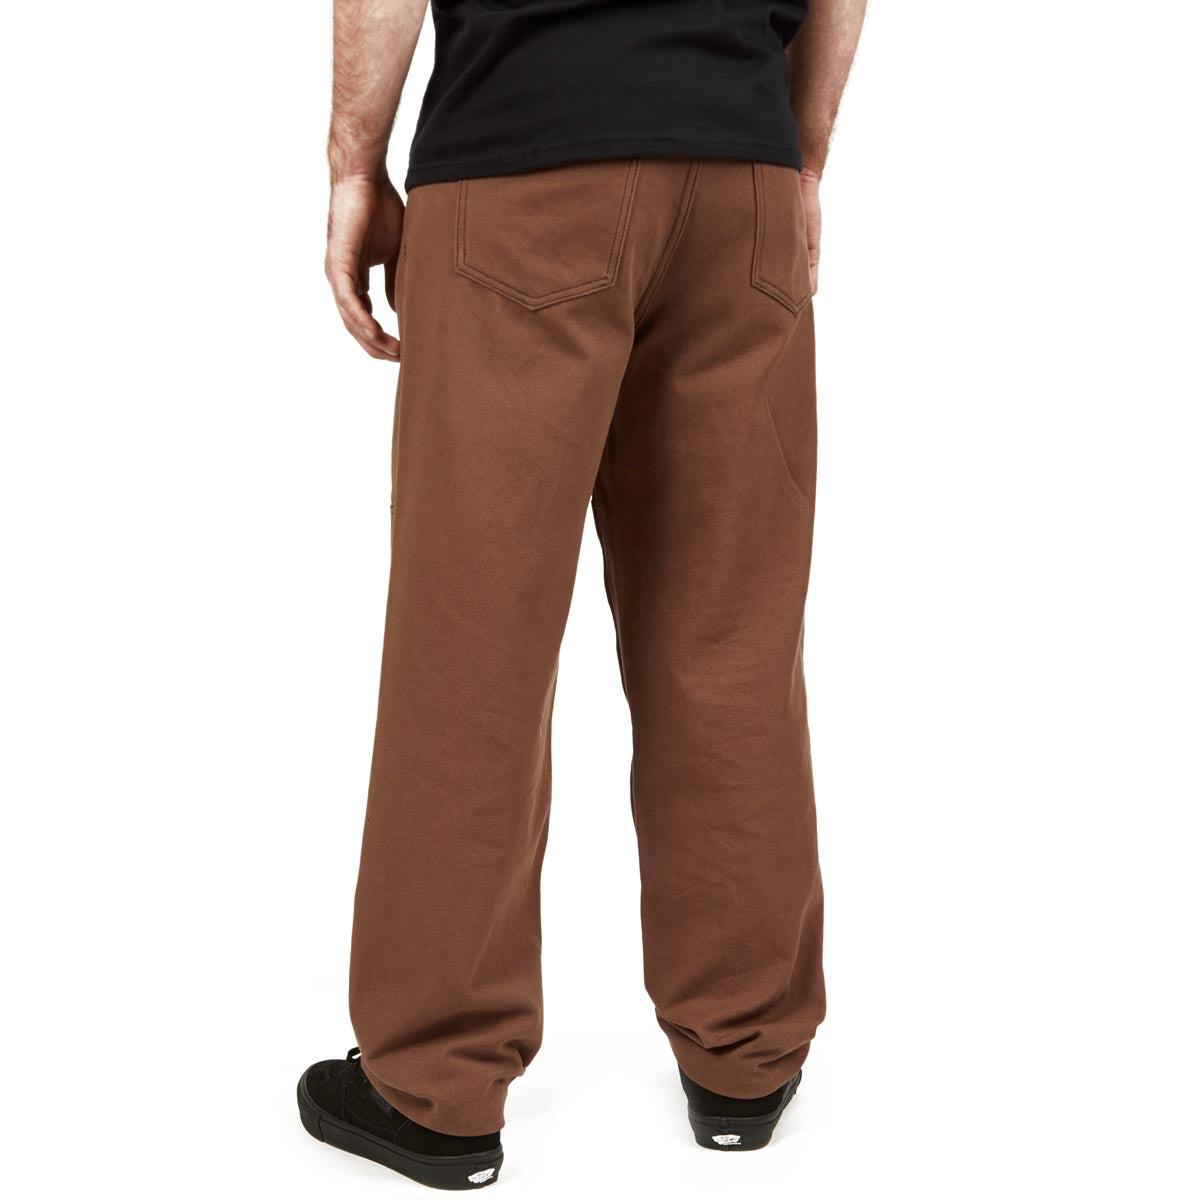 CCS Double Knee Original Relaxed Canvas Pants - Brown/Black image 2